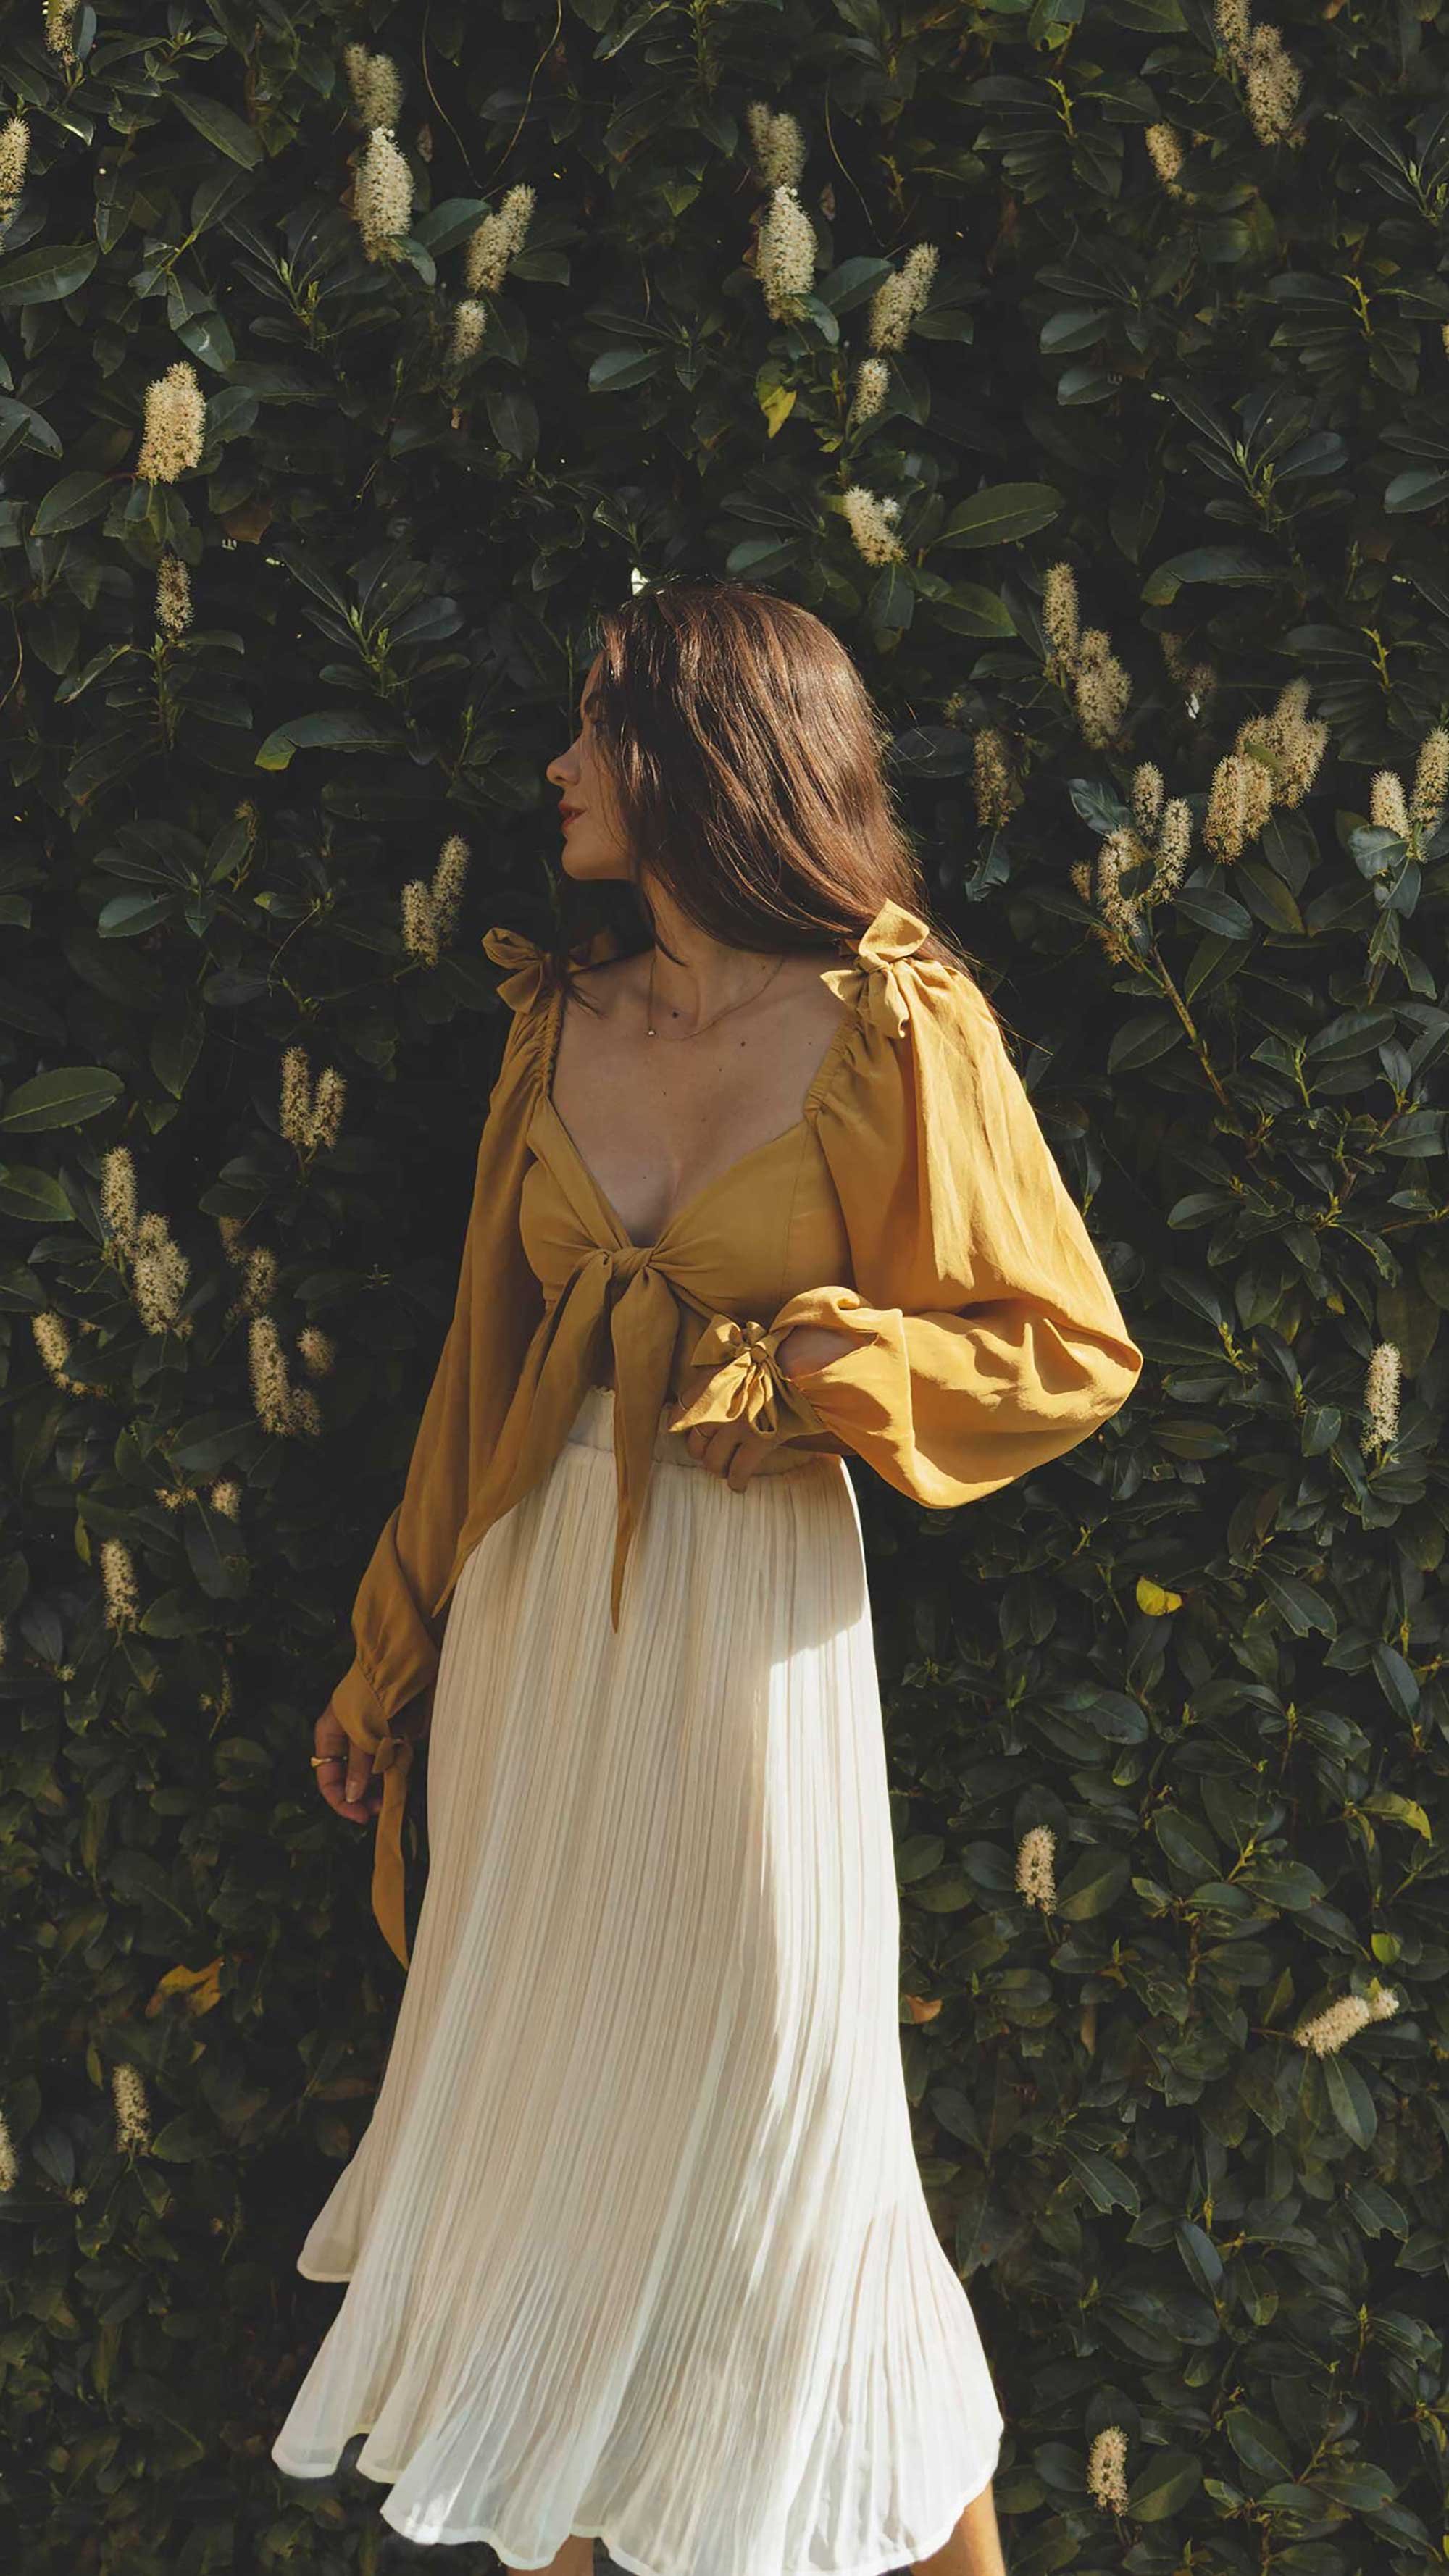 Easy+Summer+Outfit+Ideas.+Sarah+Butler+of+@sarahchristine+wearing+Yellow+Tie+Front+Crop+Top+and+White+Pleated+Skirt+in+Seattle,+Washington.jpg